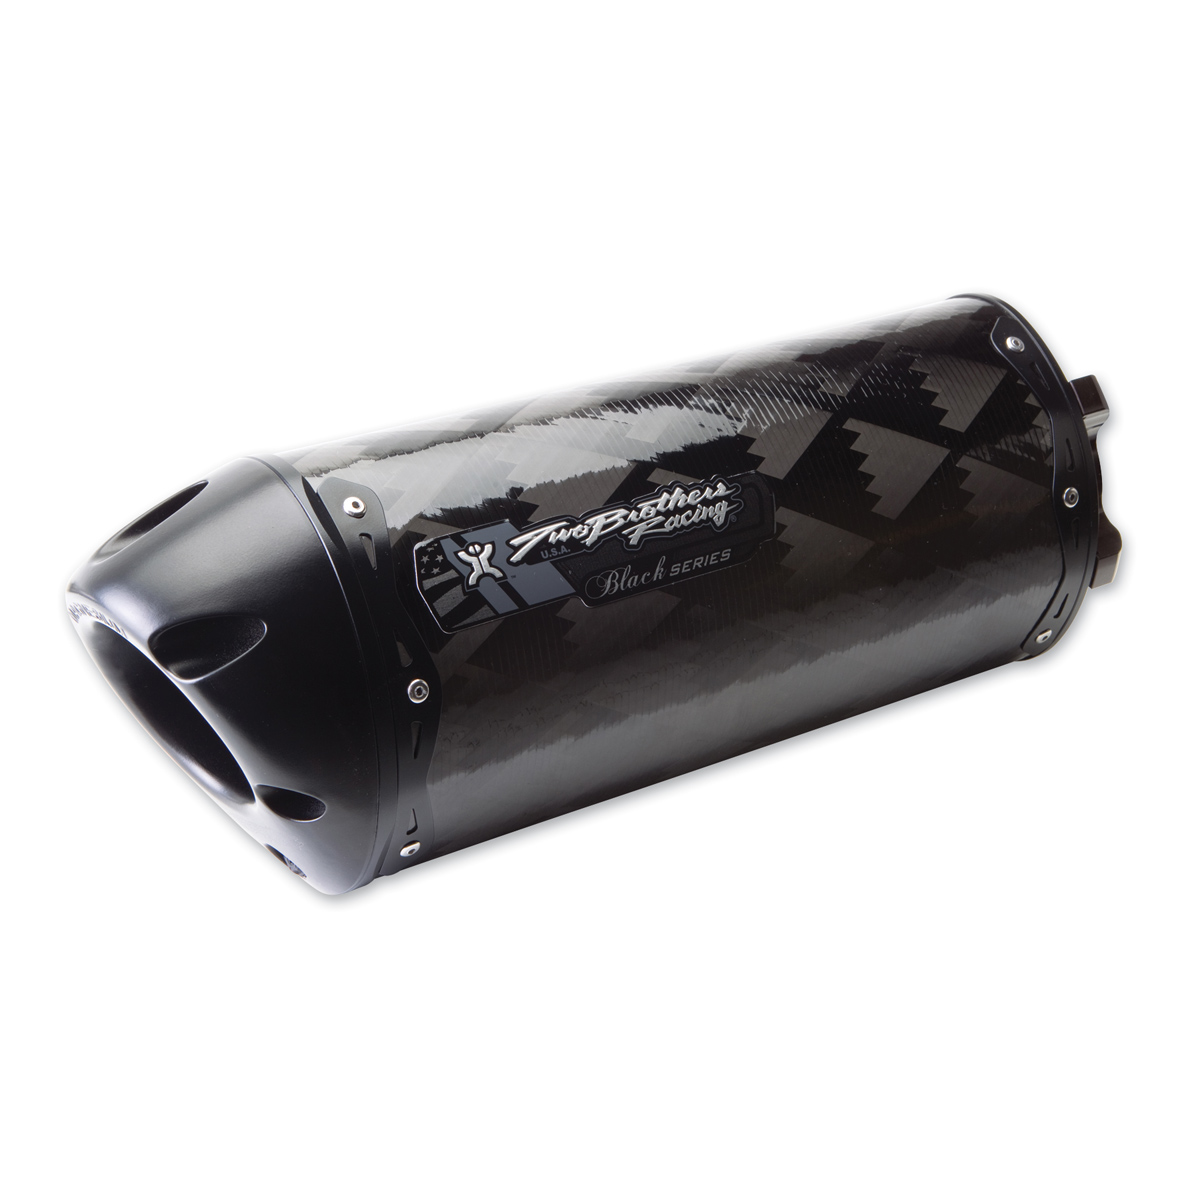 Two Brothers Racing Carbon Fiber M-2 Black Series Slip-On Exhaust